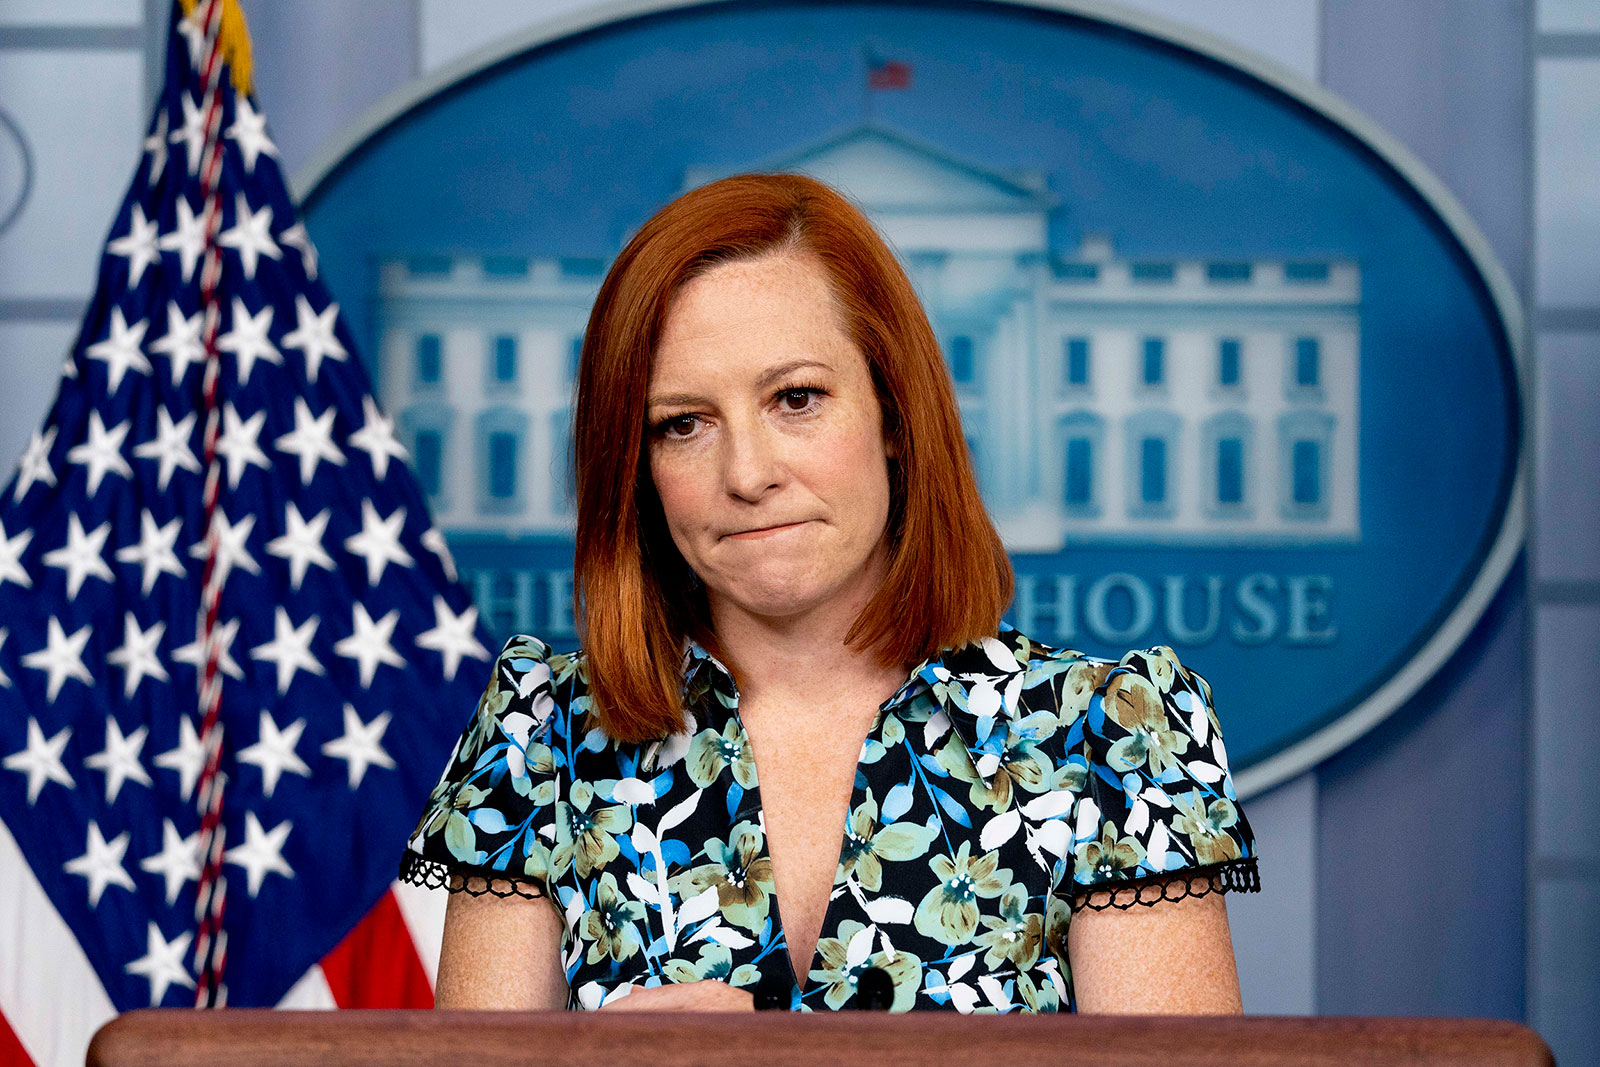 White House press secretary Jen Psaki takes a question from a reporter on Friday.